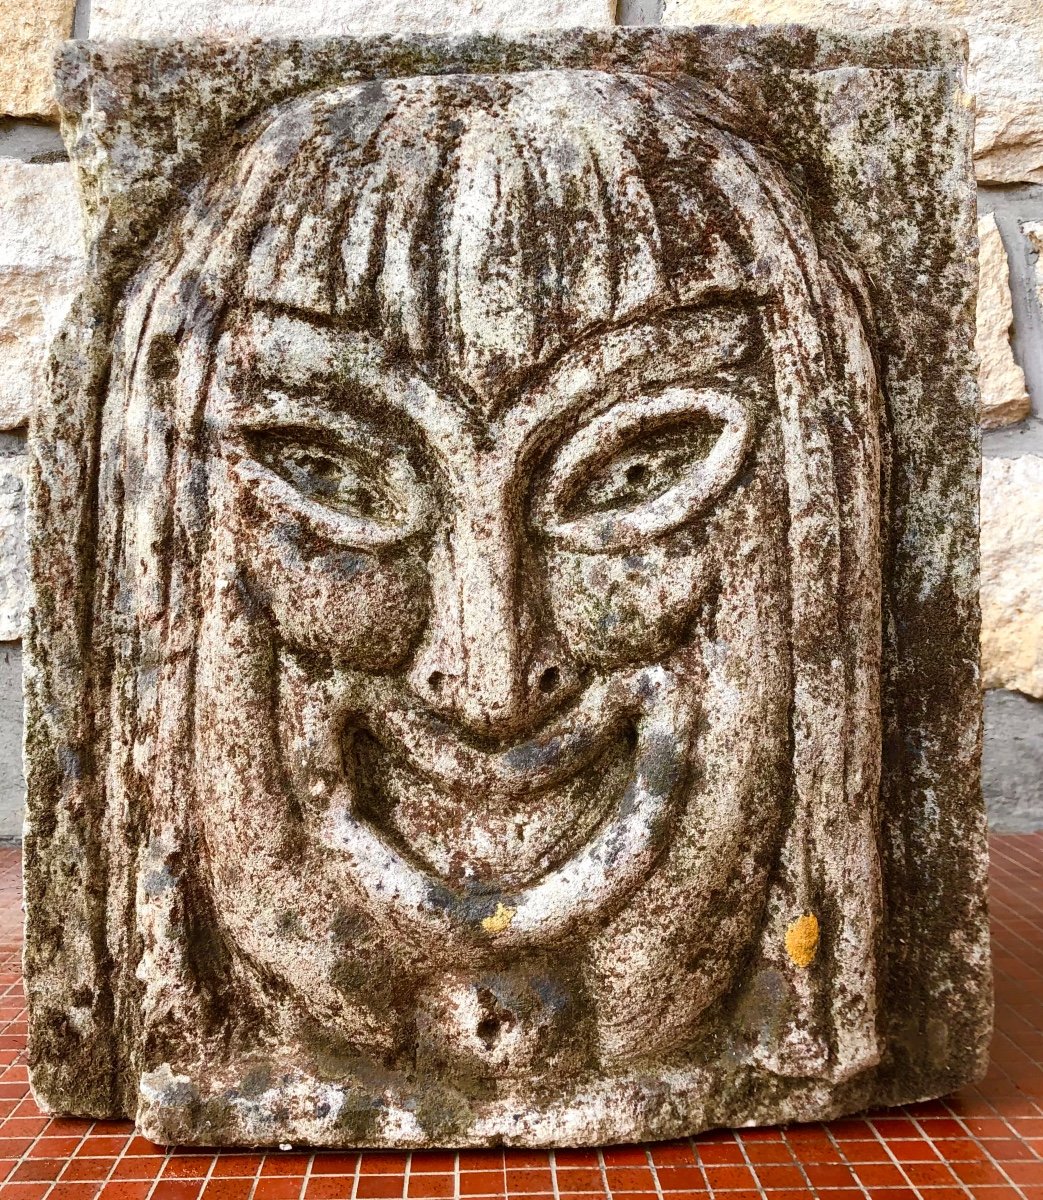 Stone Mascaron Inspired By A Comedy Mask